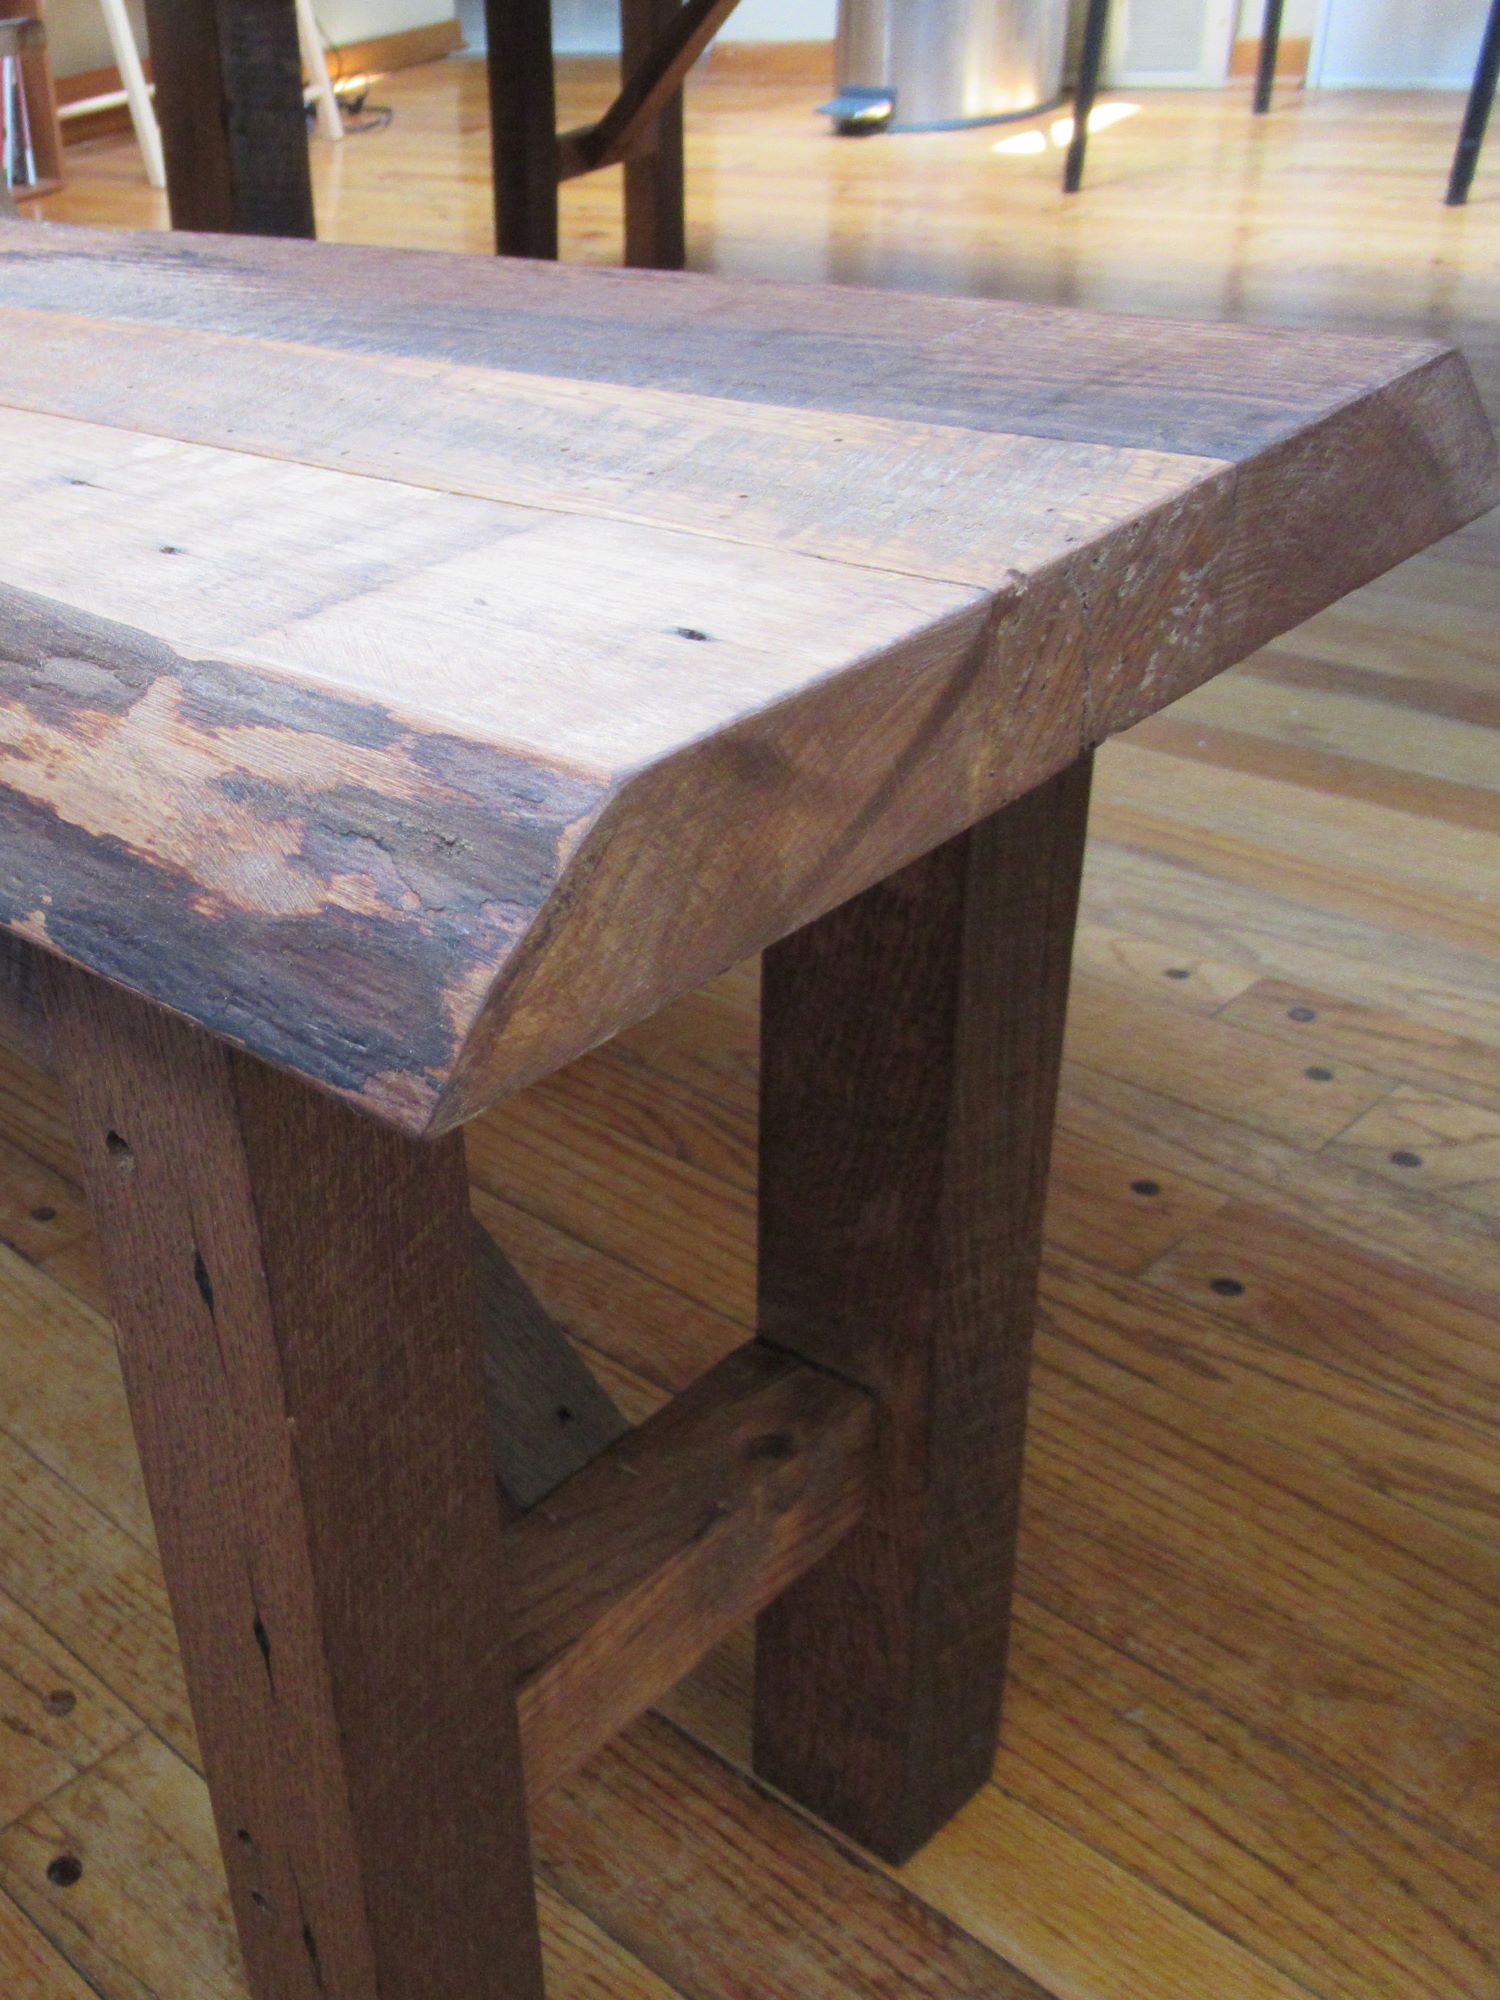 The end of a custom made reclaimed barnwood bench